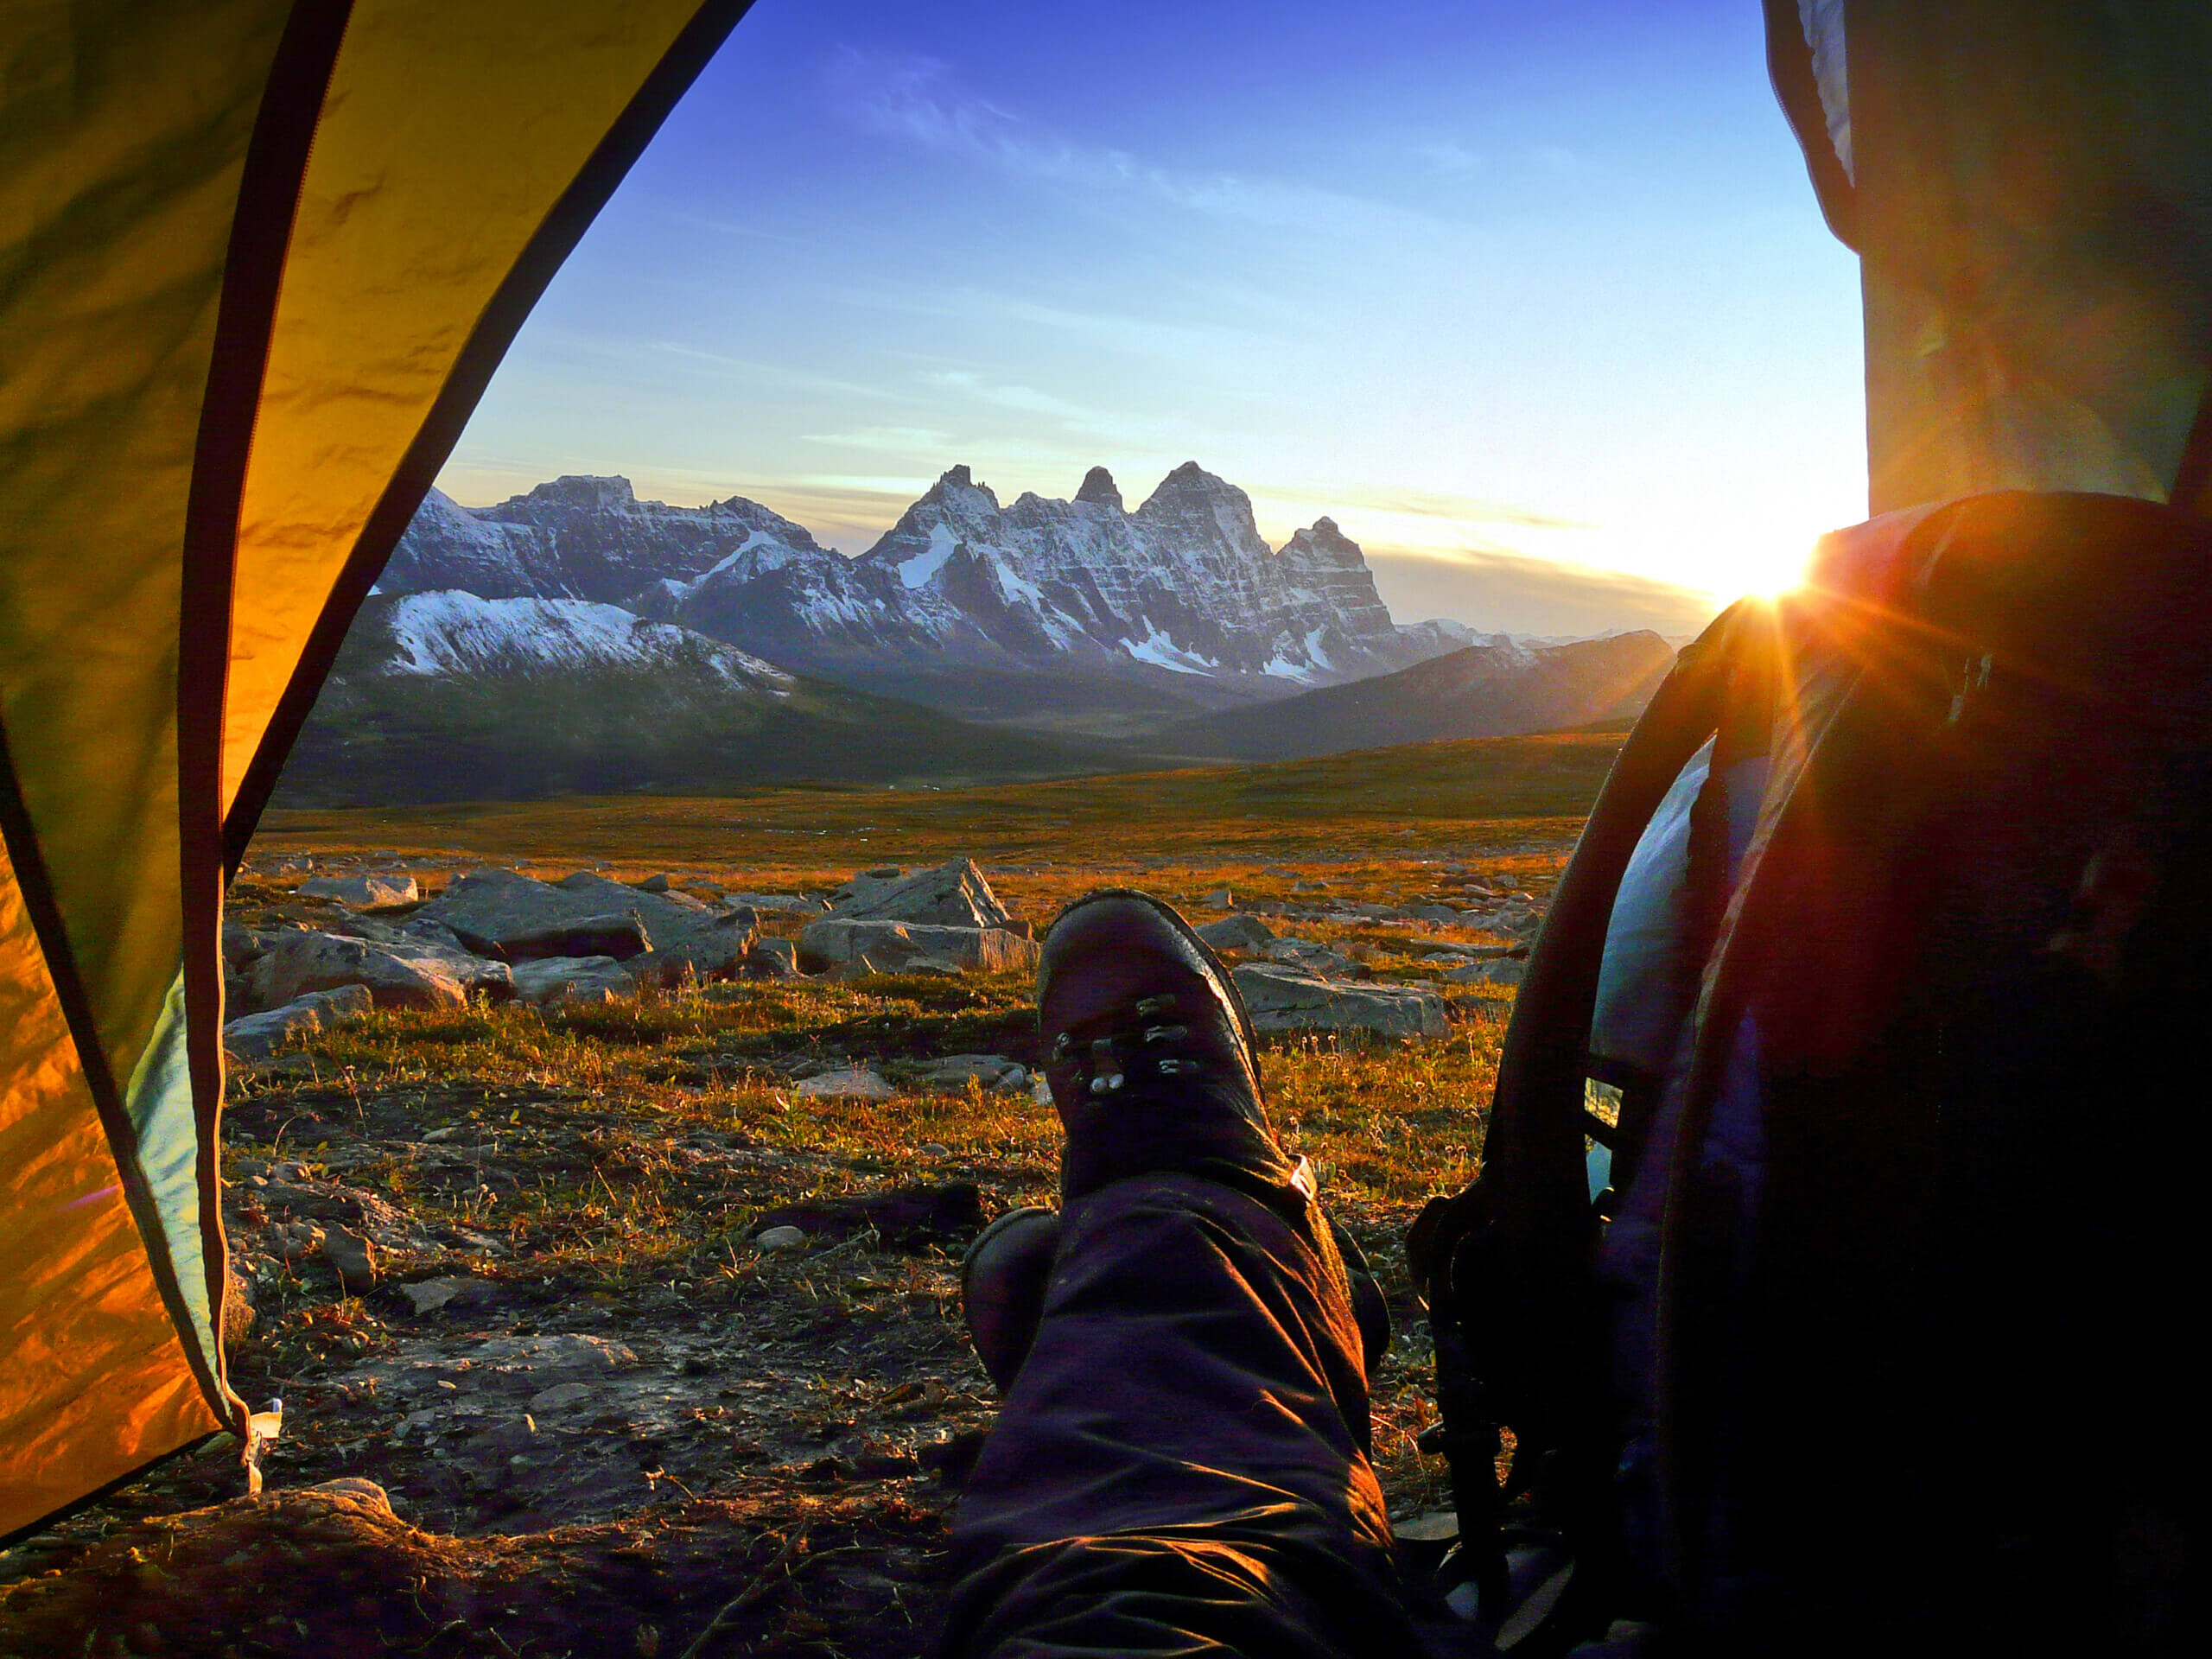 Camping or Luxury in the Rockies: Which Travel Style Suits You Best?